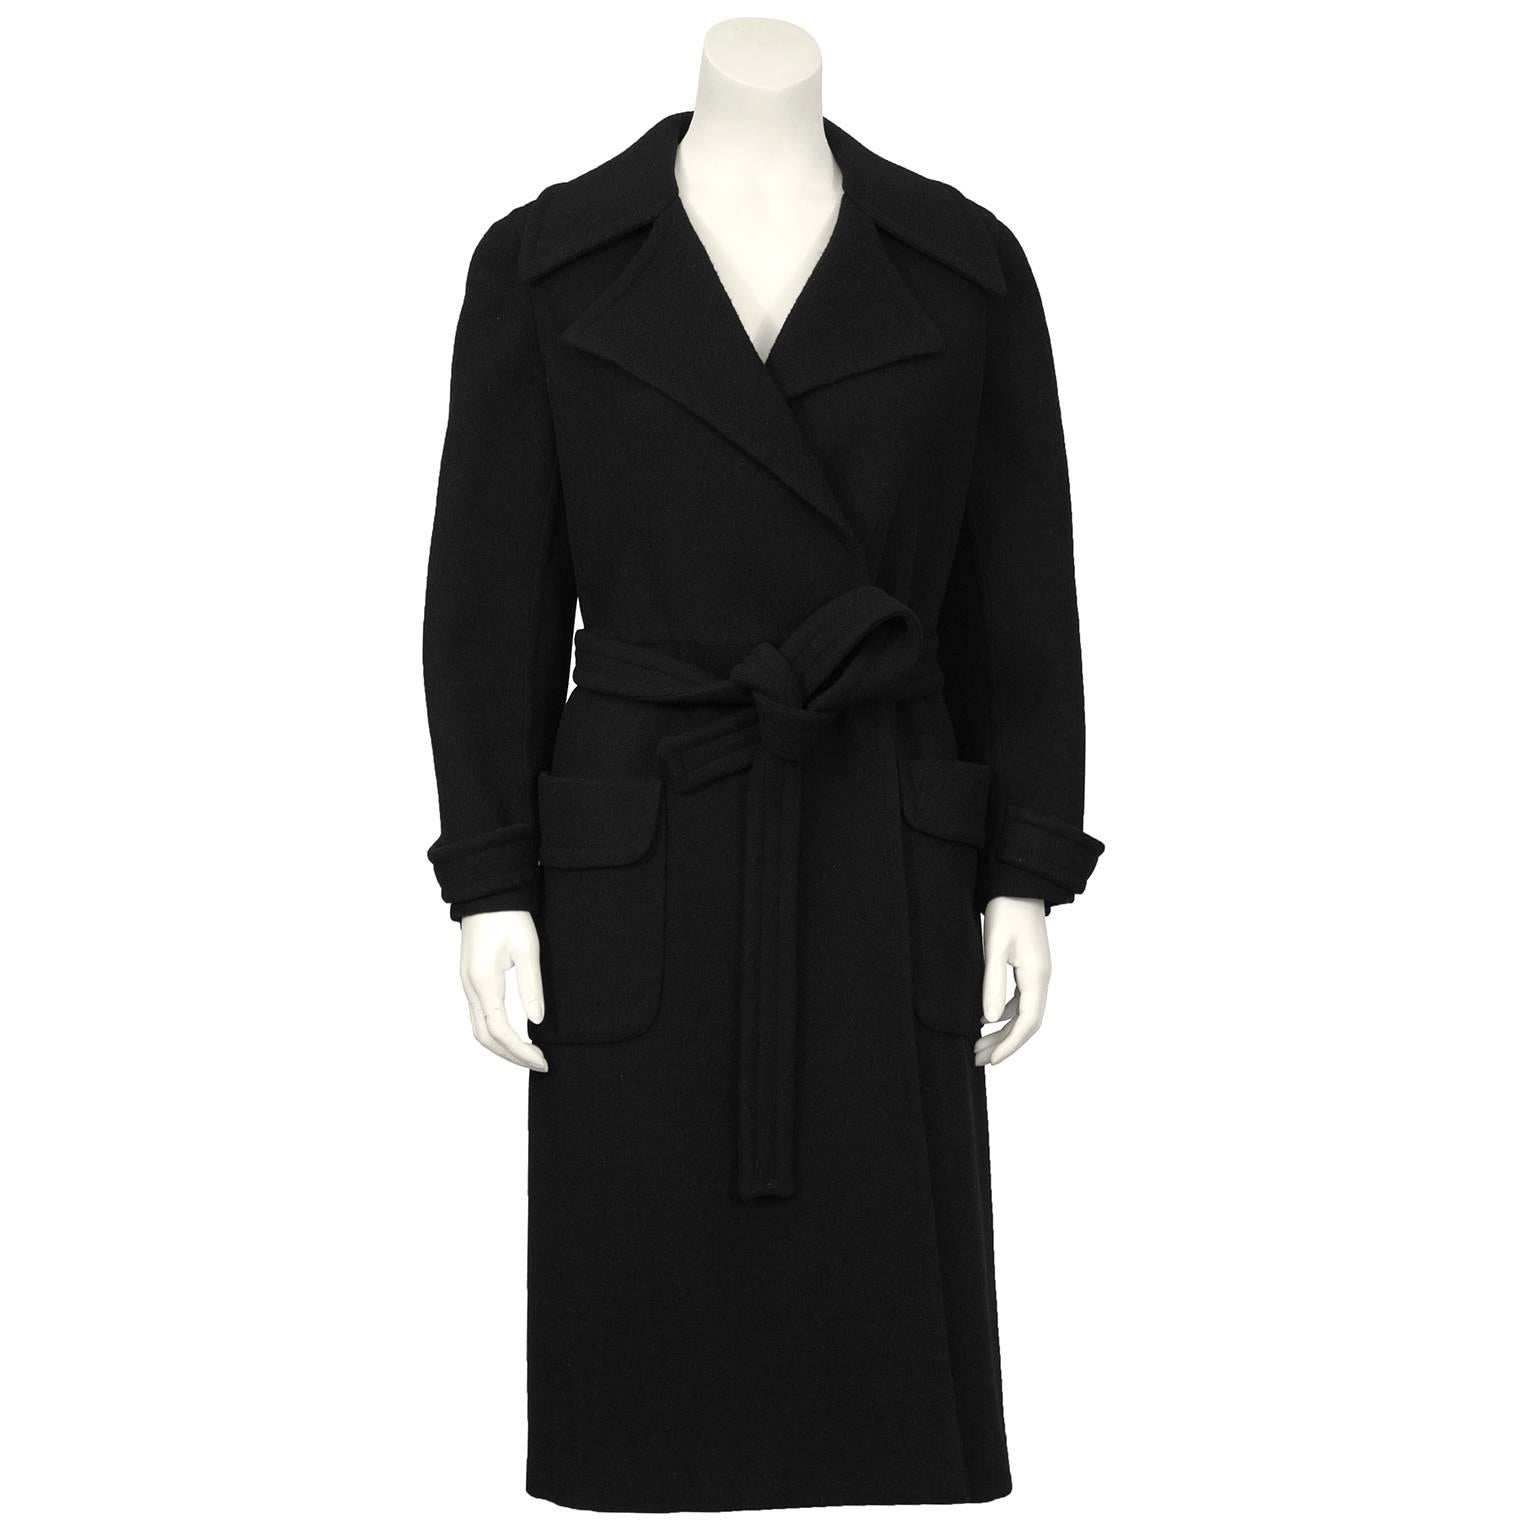 1970's double faced wool soft shaped coat. Notched collar, self tie belt and patch pockets with flaps. Perfect weight for winter travel. Welted seams give this coat a modern feel. Narrow shoulder, excellent condition. Fits like a US 4-6.

Sleeve: